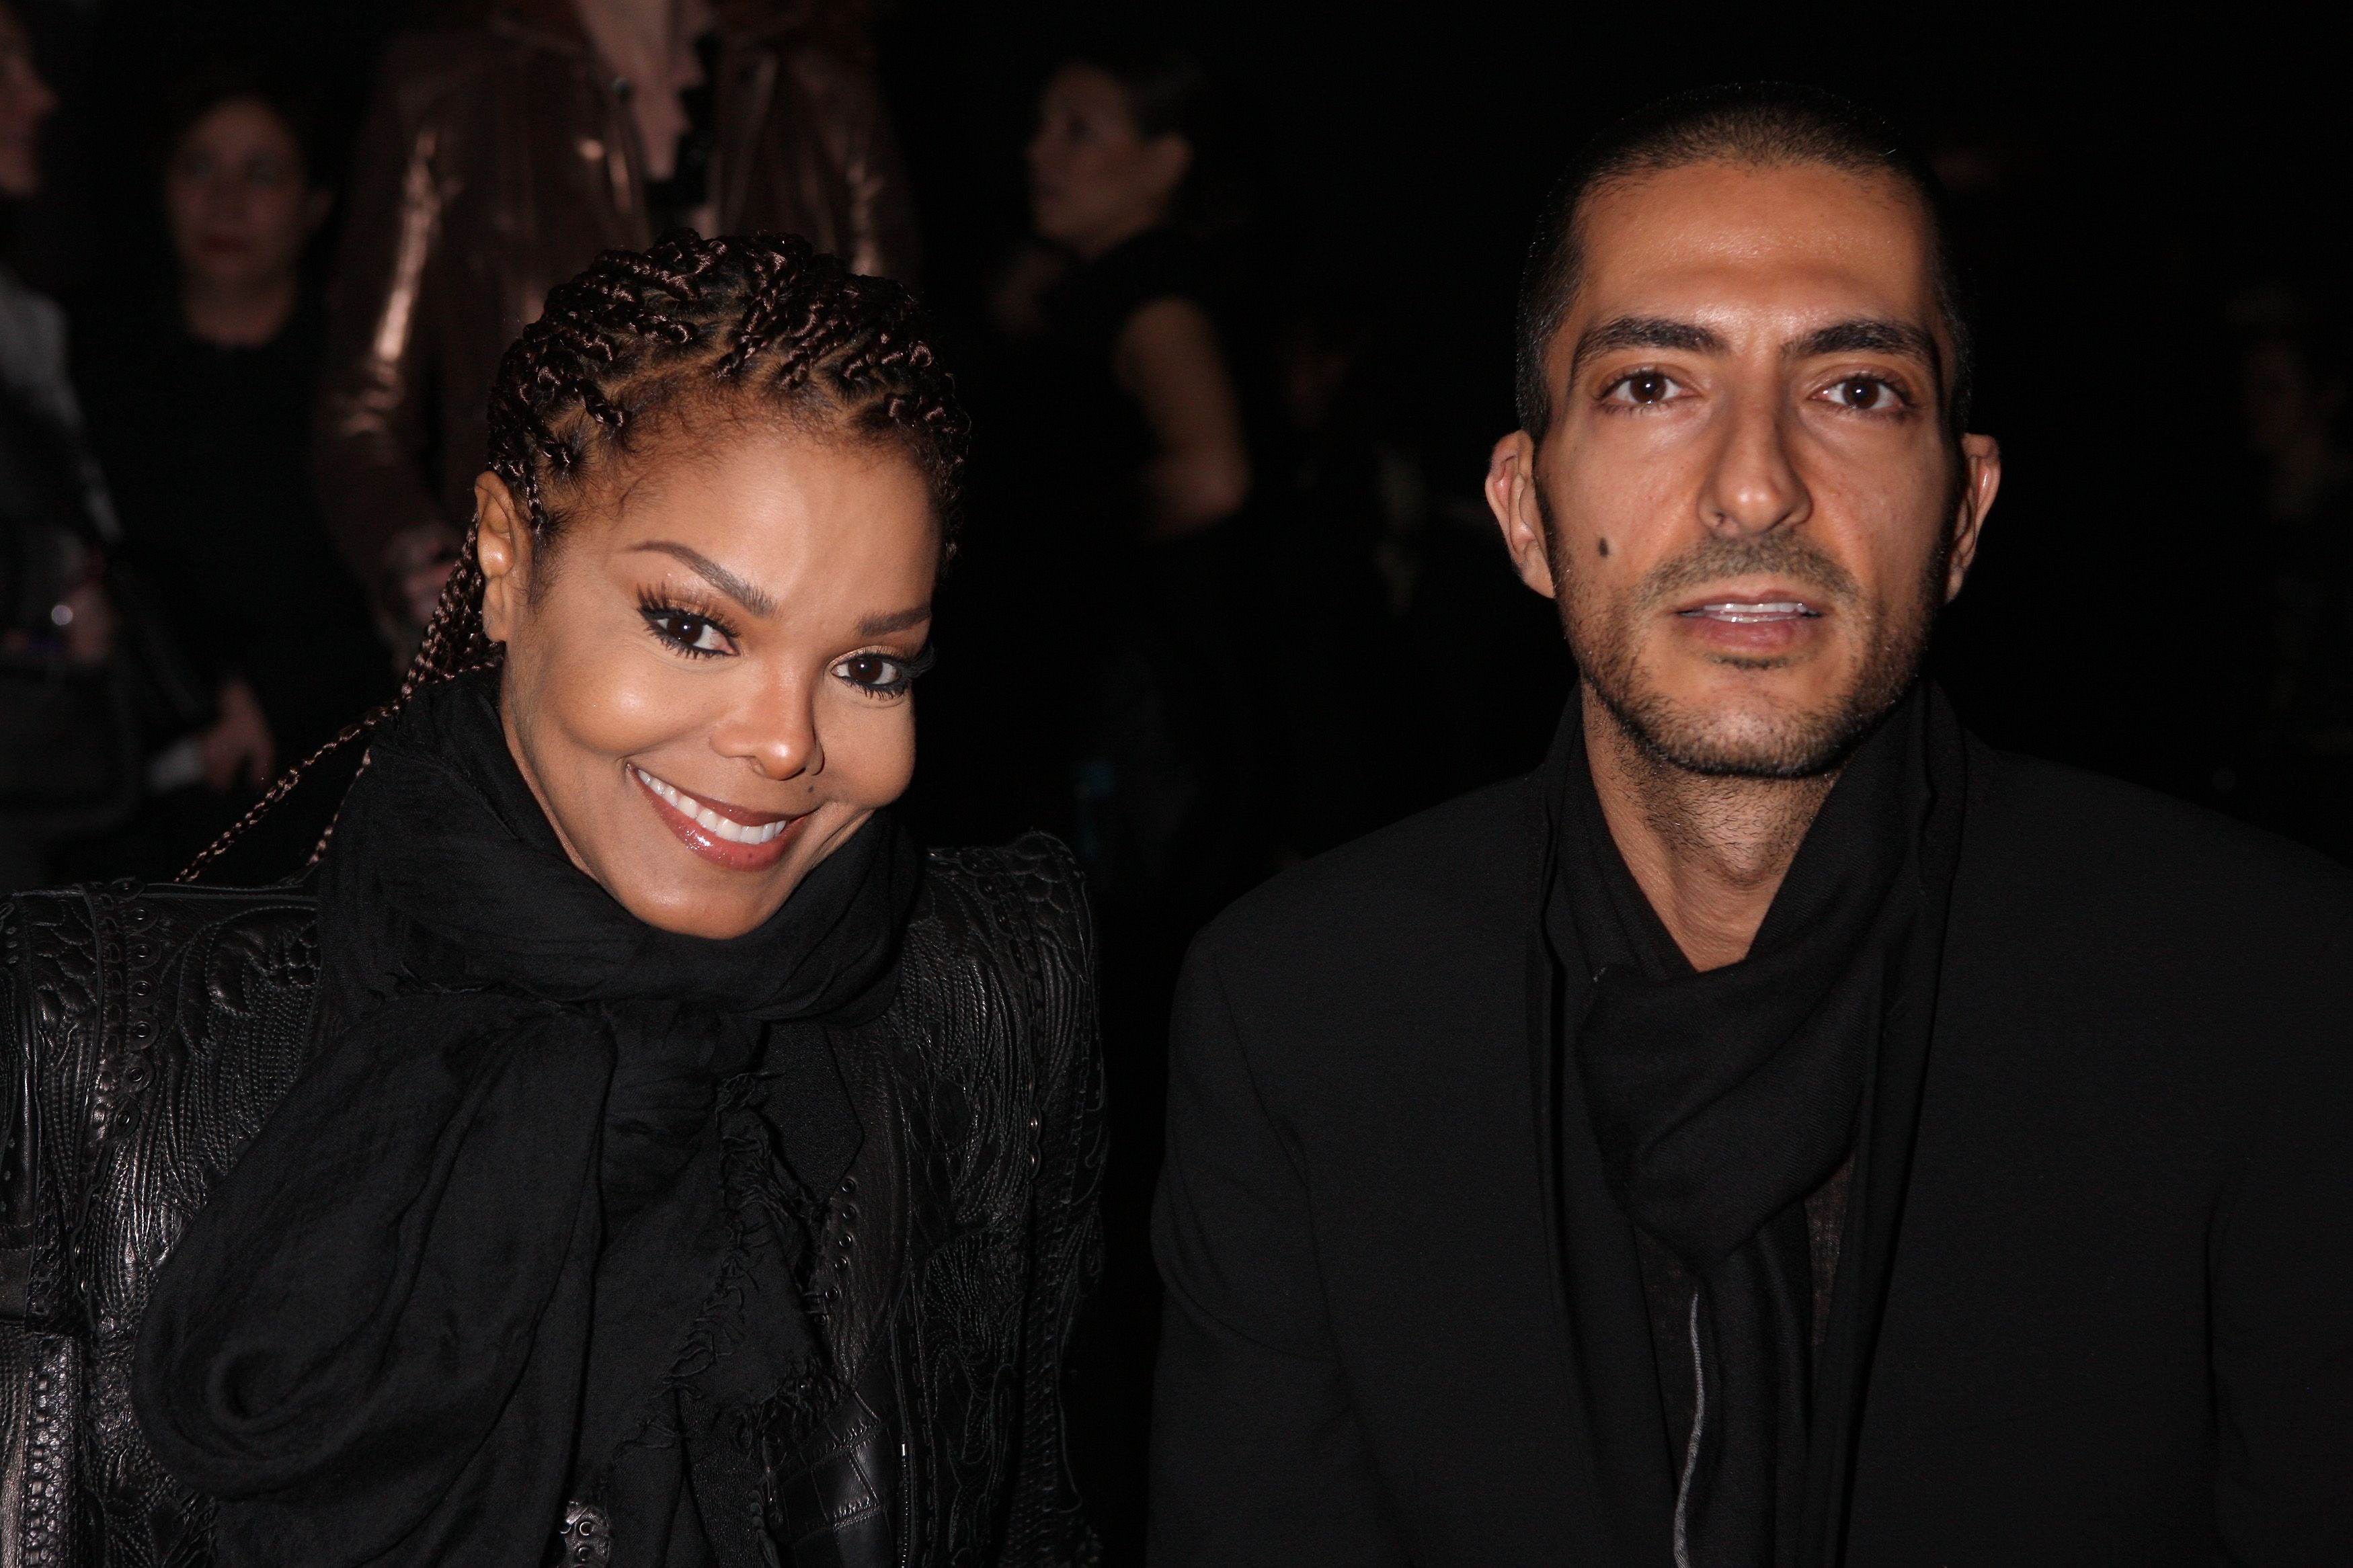 MILAN, ITALY - FEBRUARY 21: Janet Jackson and Wissam al Mana attend the Sergio Rossi presentation cocktail during Milan Fashion Week Womenswear Fall/Winter 2013/14 on February 21, 2013 in Milan, Italy. (Photo by Vincenzo Lombardo/Getty Images for Sergio Rossi)